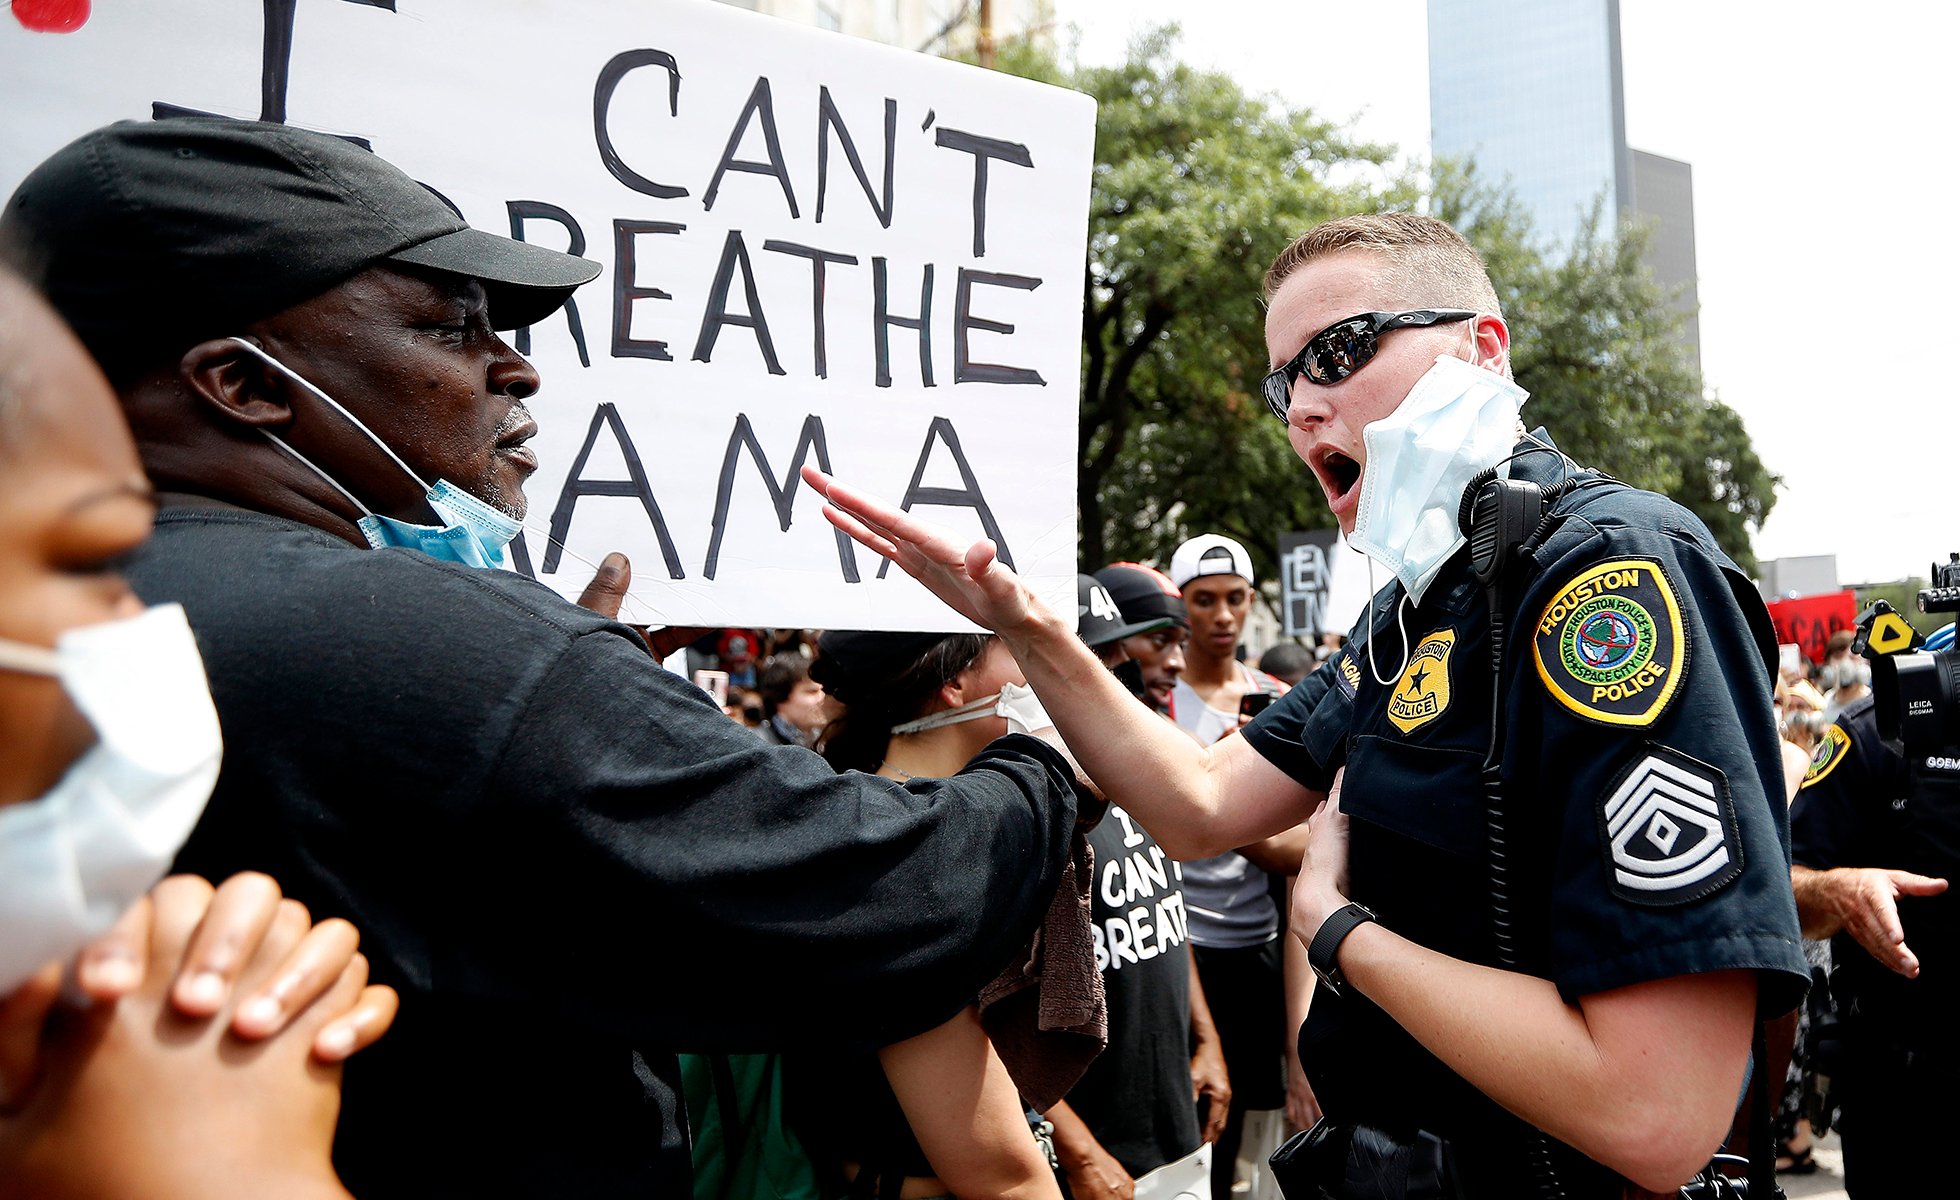 Protesters clash with Houston Police officers as they take to Bagby Street near City Hall in Houston, Friday, May 29, 2020, during a demonstration over the death of George Floyd. Floyd died Memorial Day while in the custody of the Minneapolis police. (Karen Warren/Houston Chronicle)/Houston Chronicle via AP)